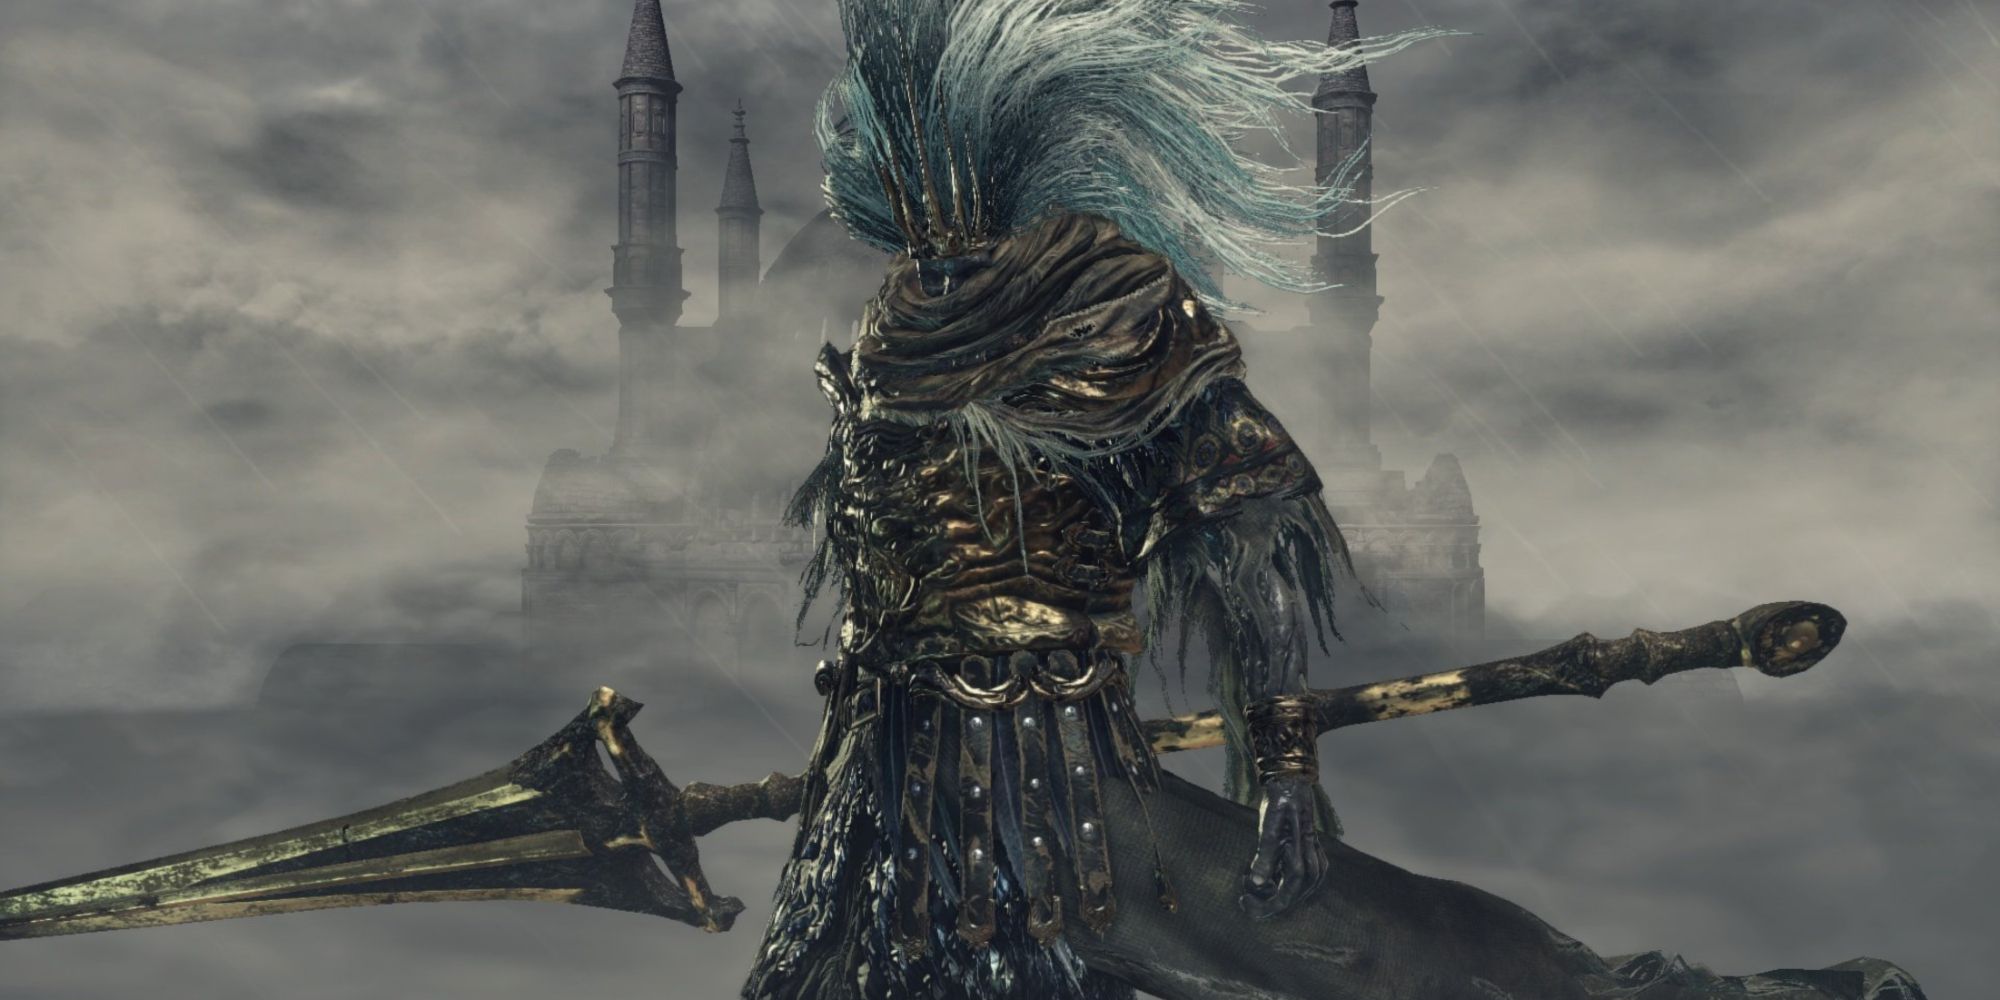 The Nameless King is Fire Lord Gwyn's lost child